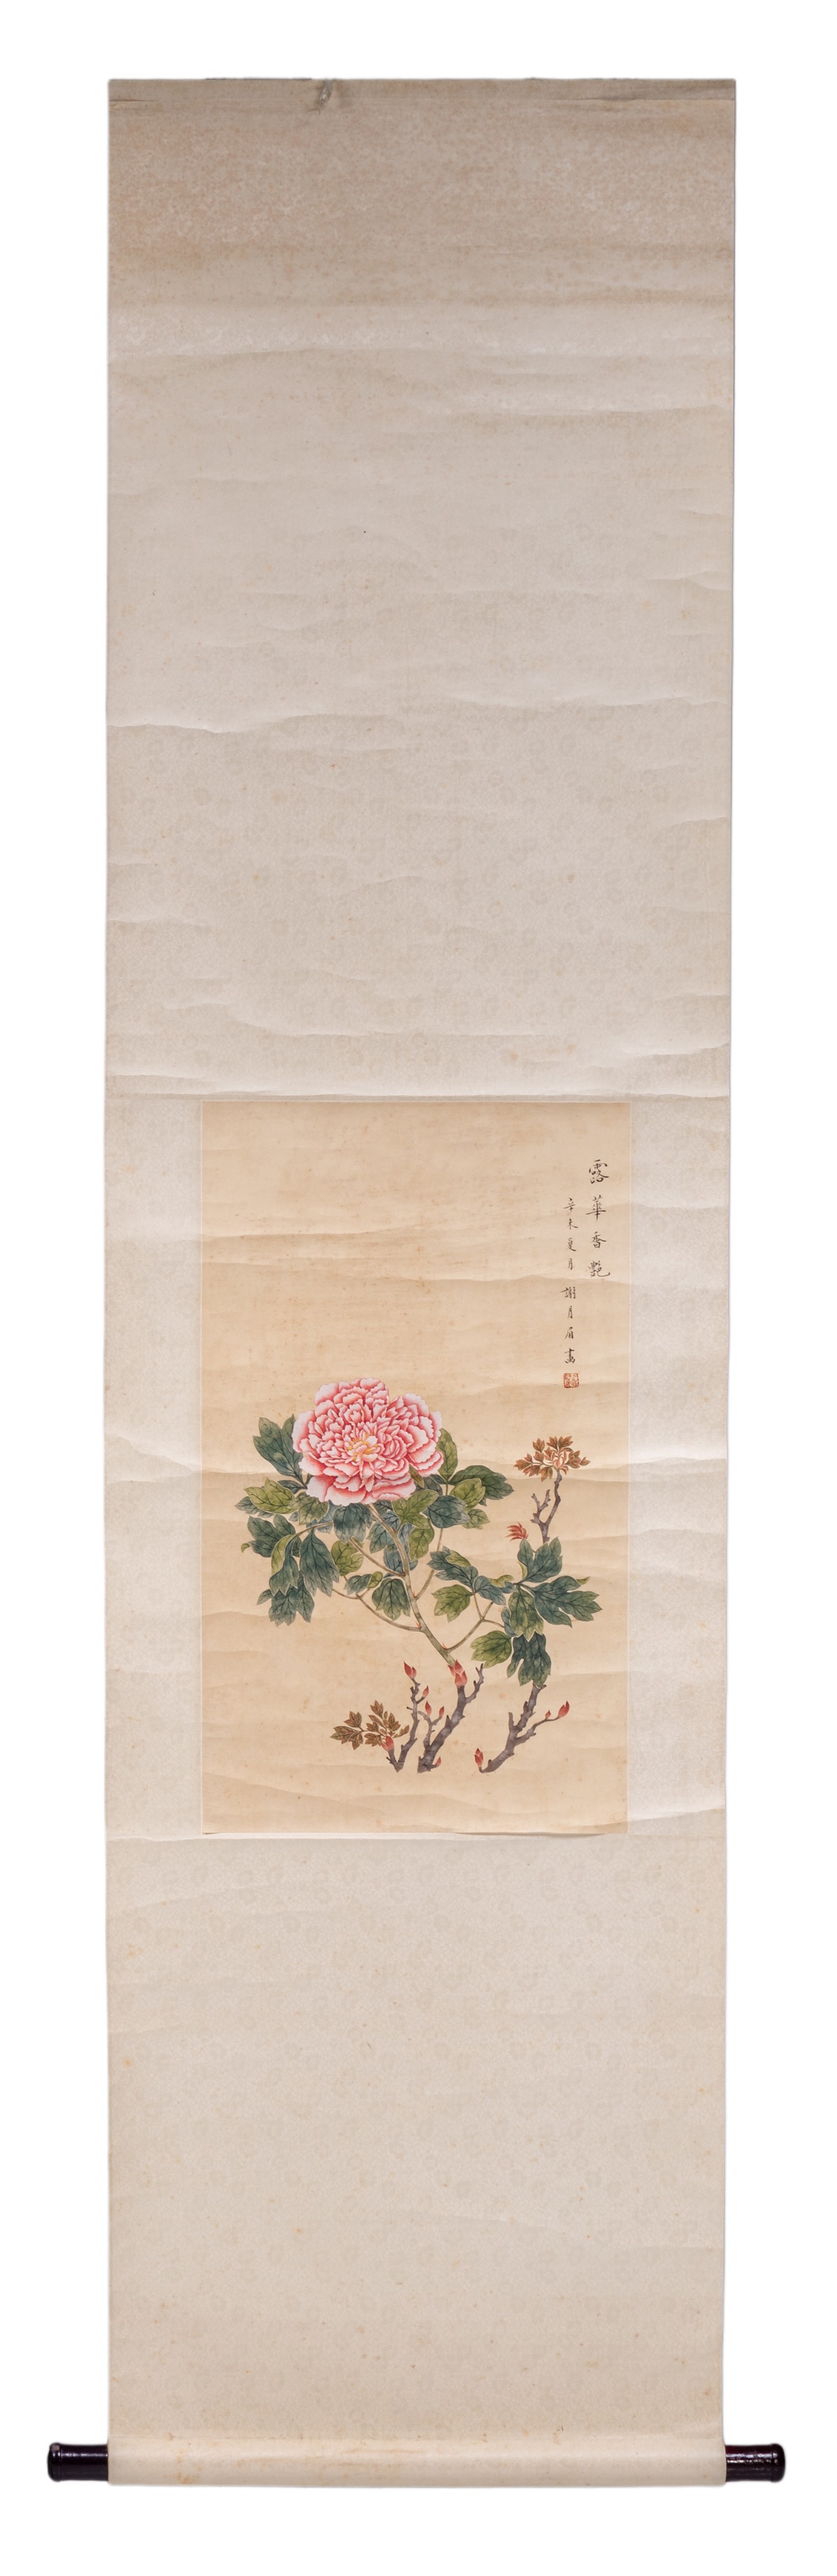 A Chinese 'Peony' scroll painting, watercolour on paper, signature reading Xie Yue Mei, 33 x 57 cm - Image 2 of 3